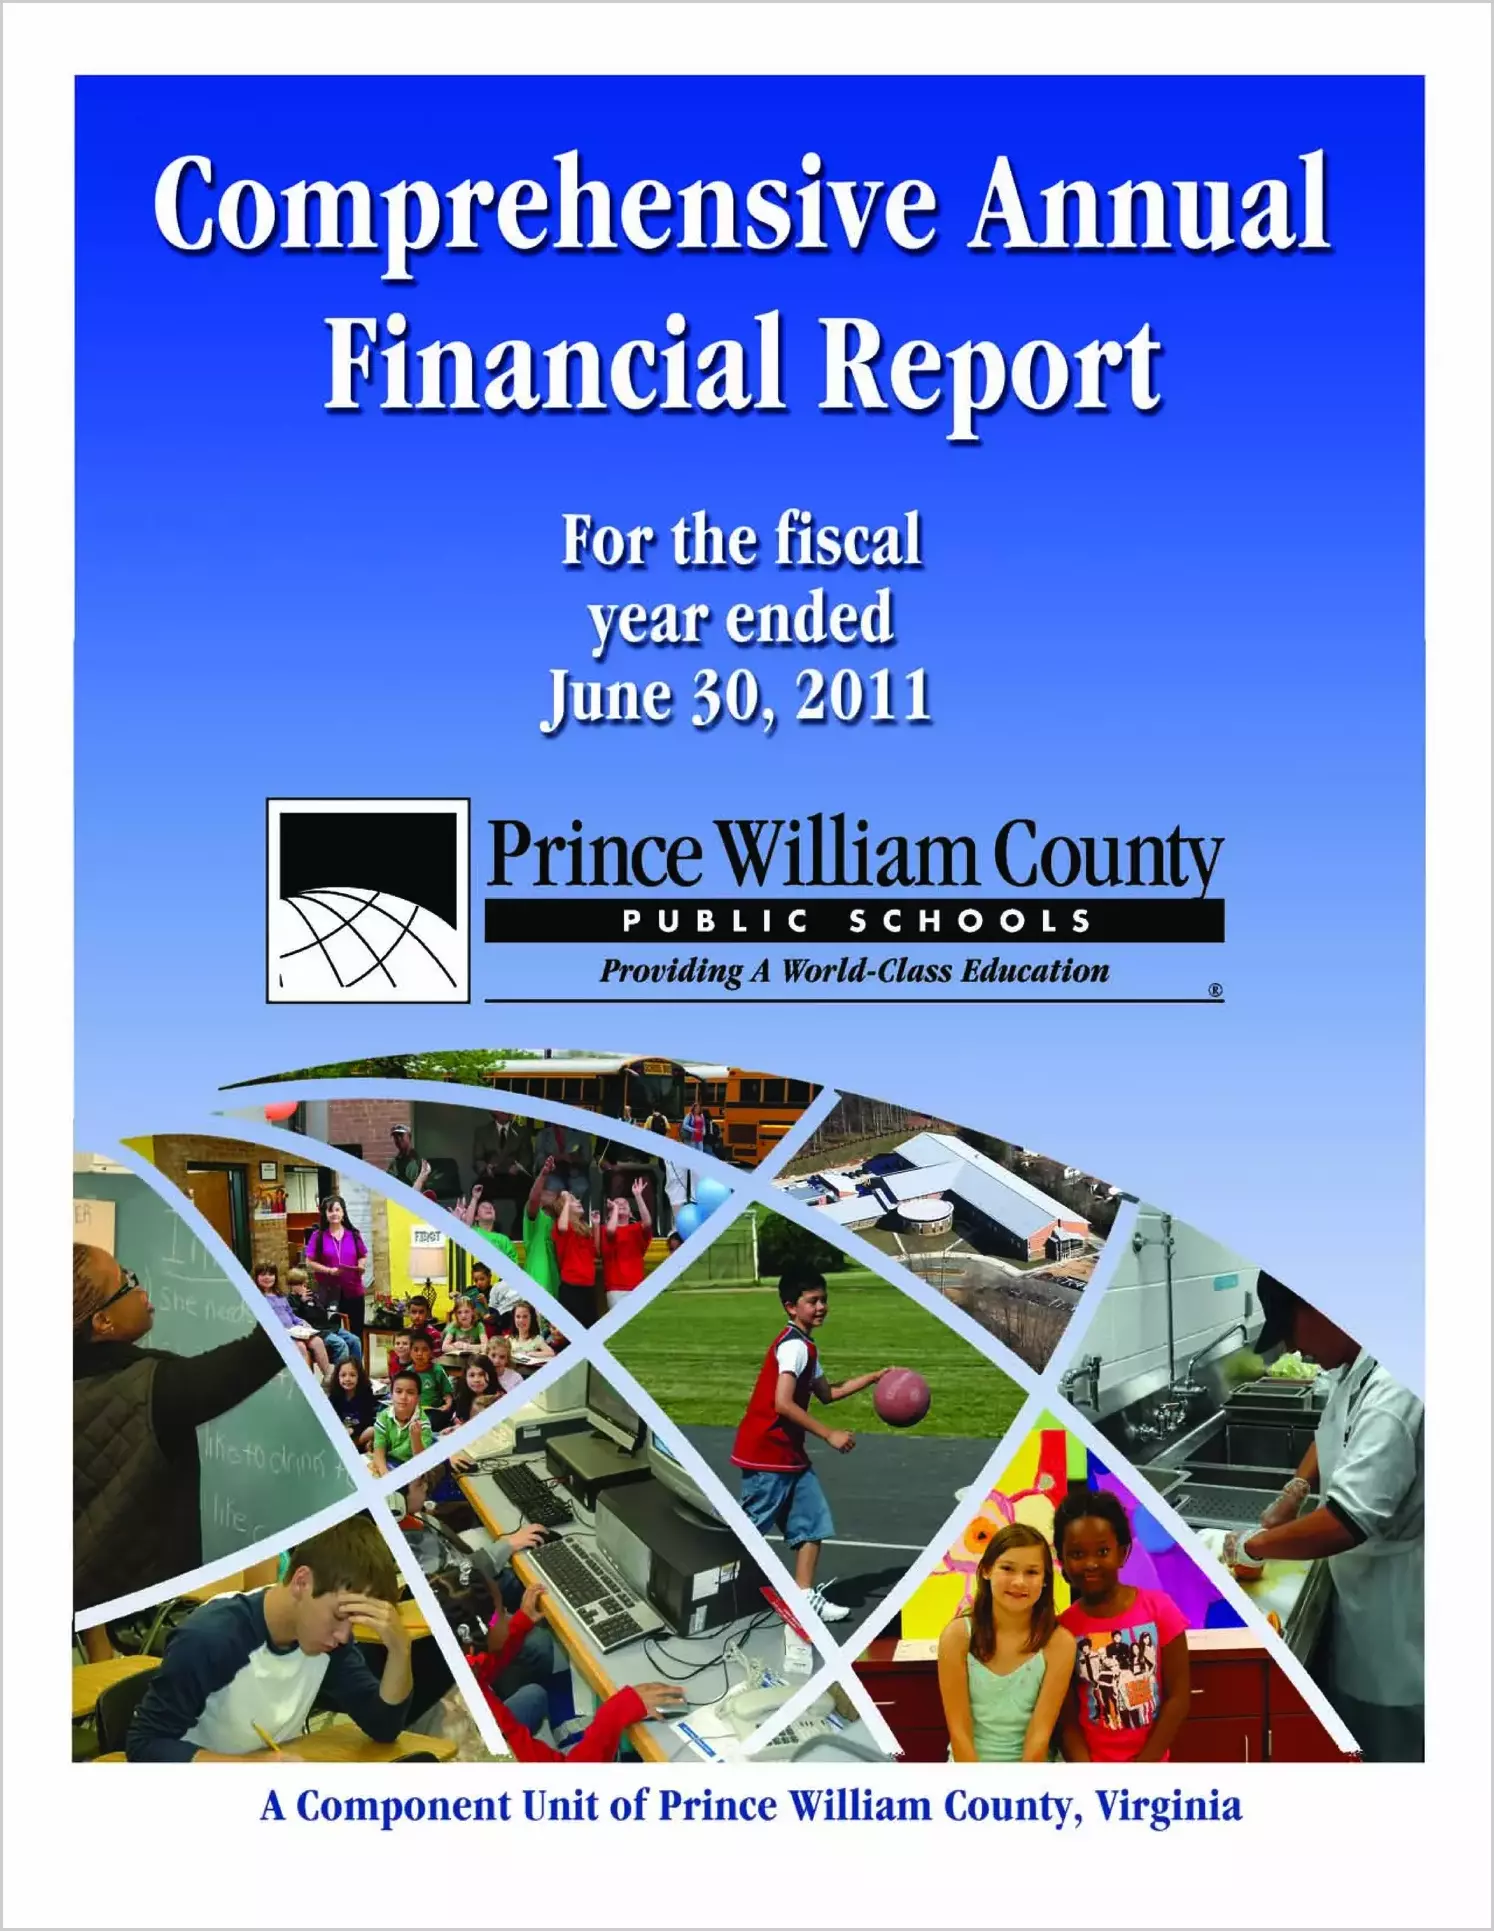 2011 Public Schools Annual Financial Report for County of Prince William